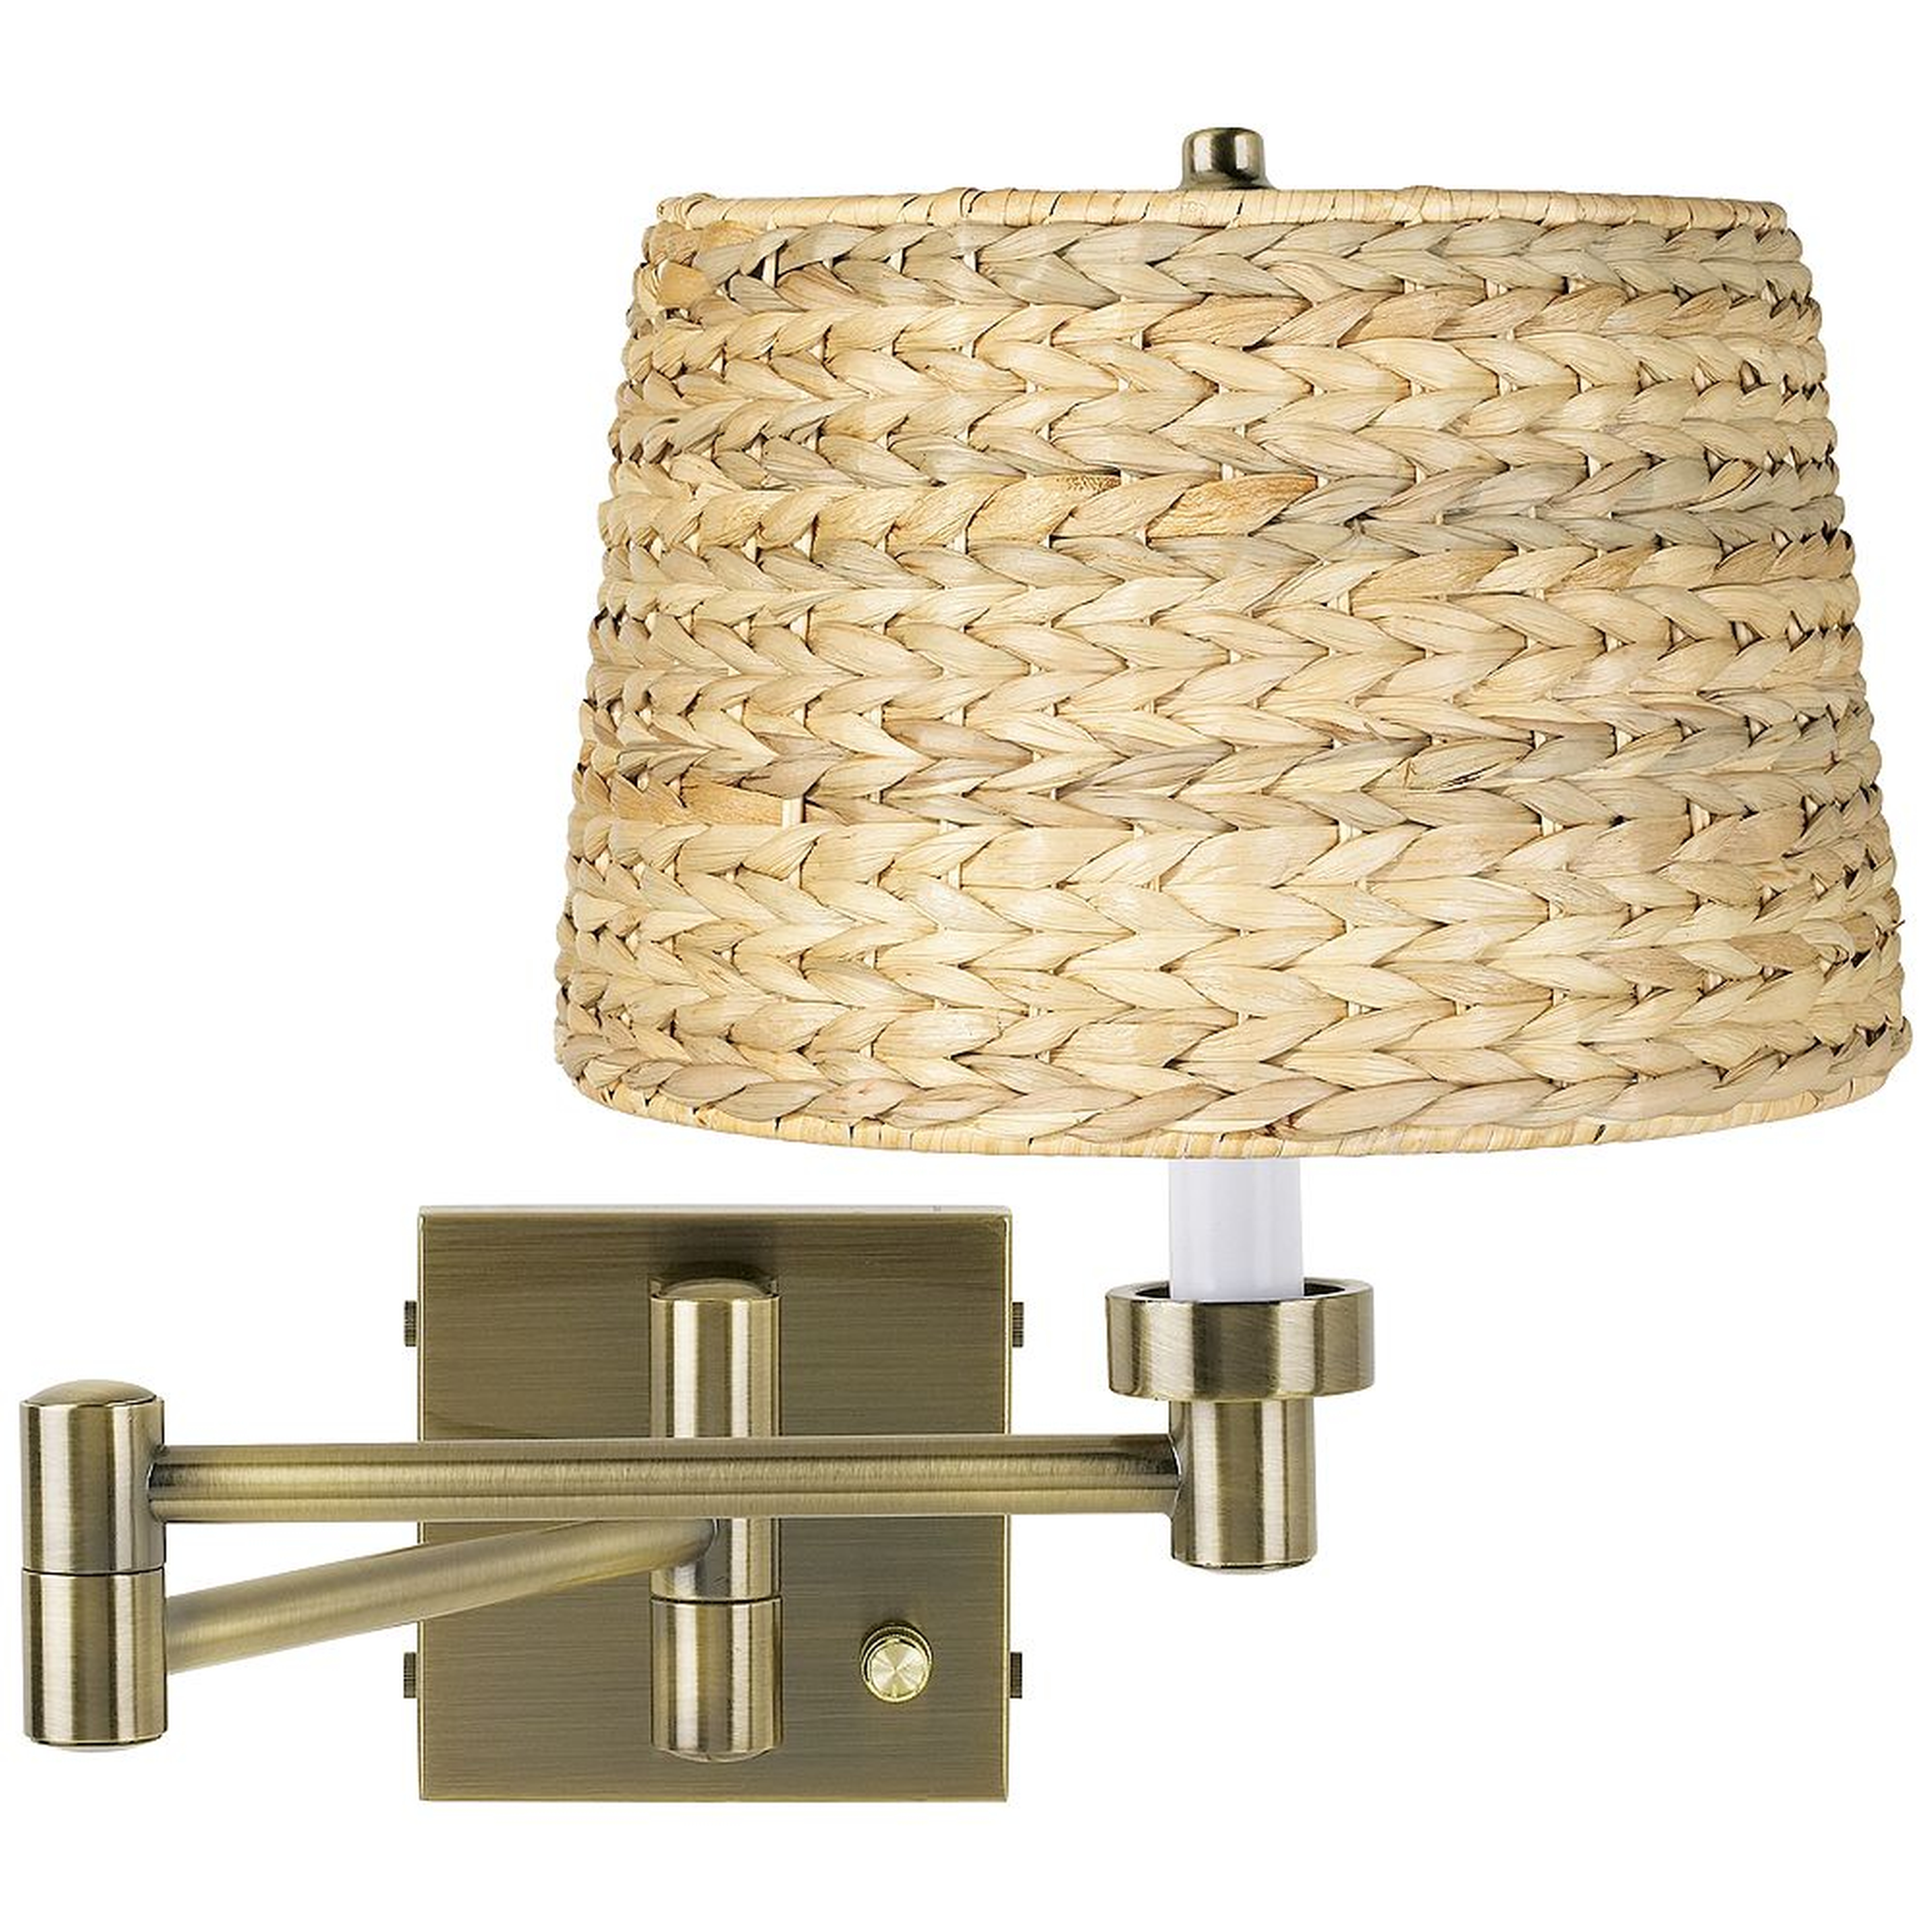 Woven Seagrass Antique Brass Plug-In Swing Arm Wall Lamp - Style # 17R01 - Lamps Plus